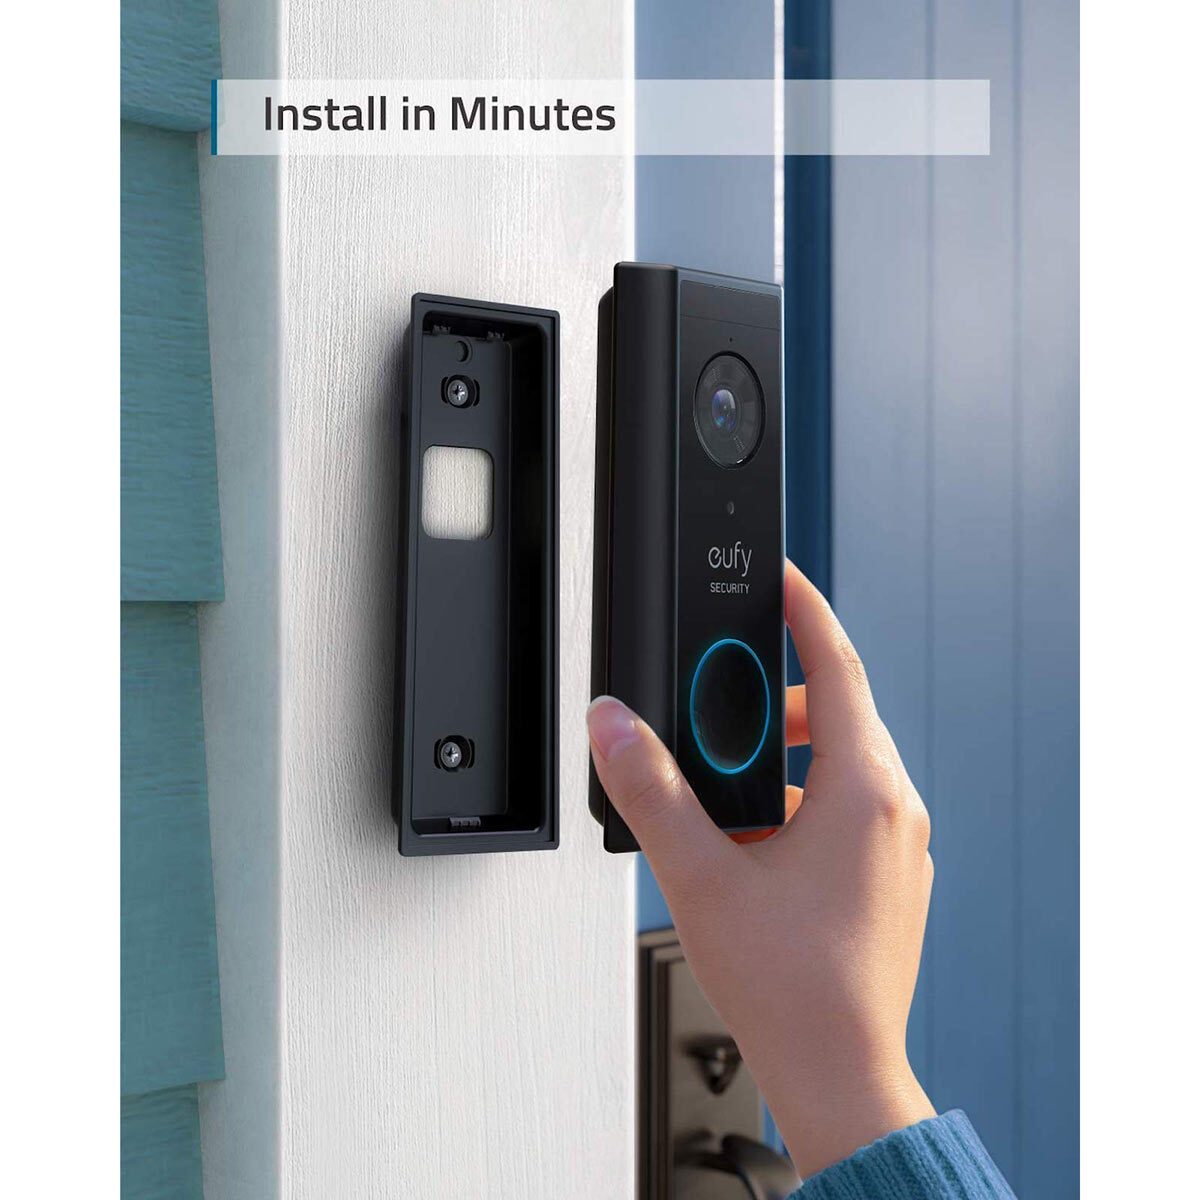 eufy 2K Video Battery Doorbell with Homebase 16GB Local Storage - Signature Retail Stores